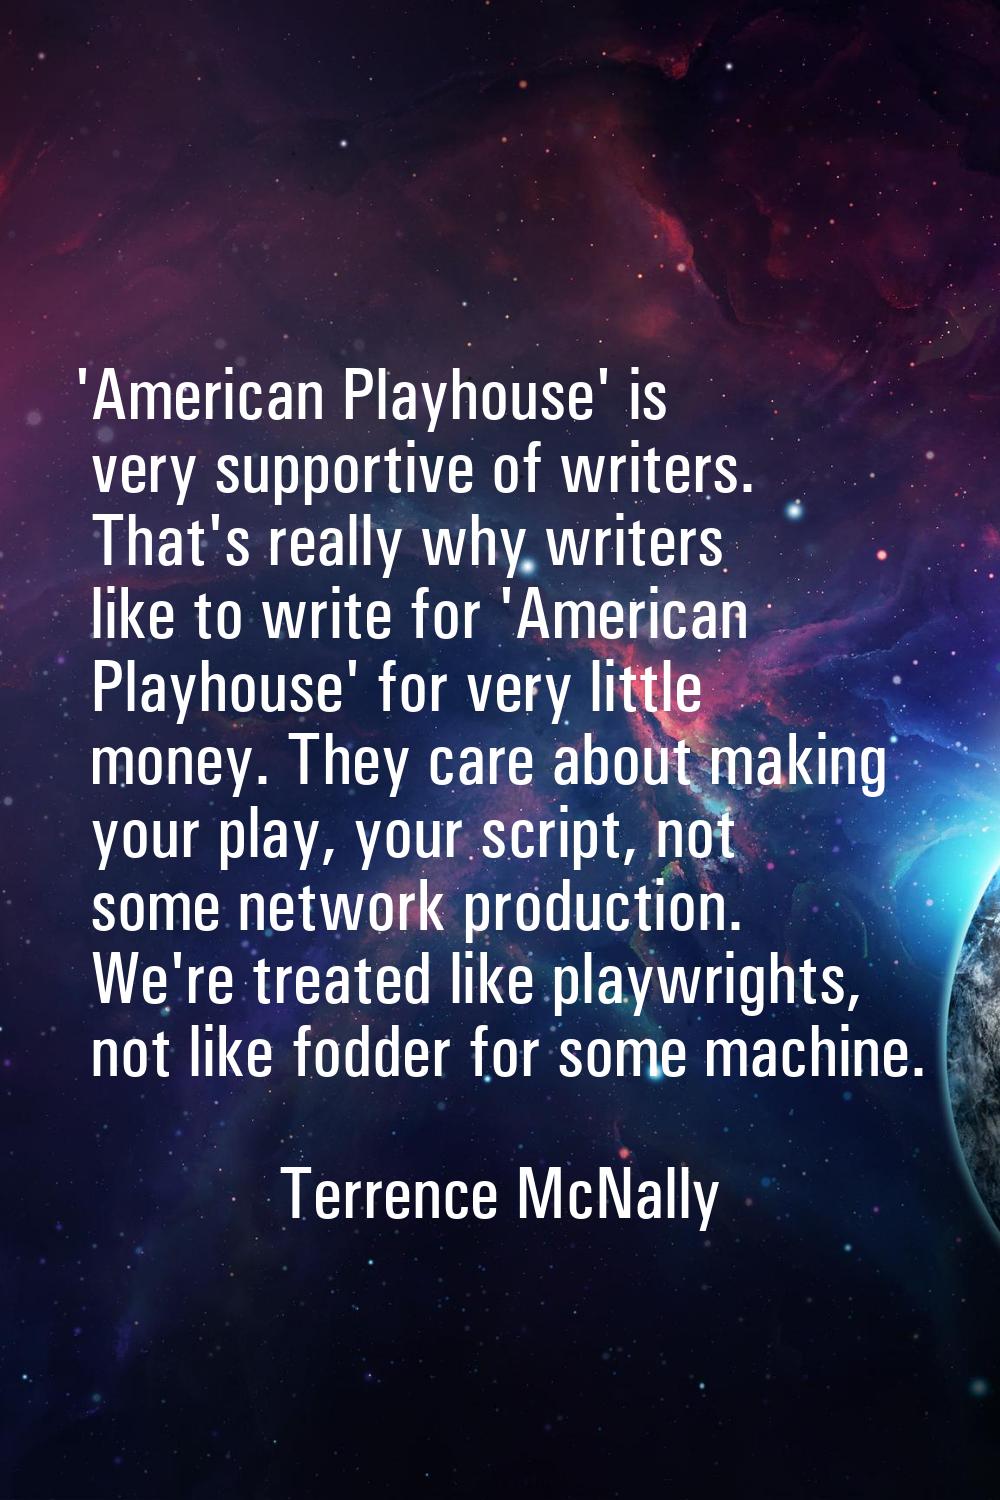 'American Playhouse' is very supportive of writers. That's really why writers like to write for 'Am